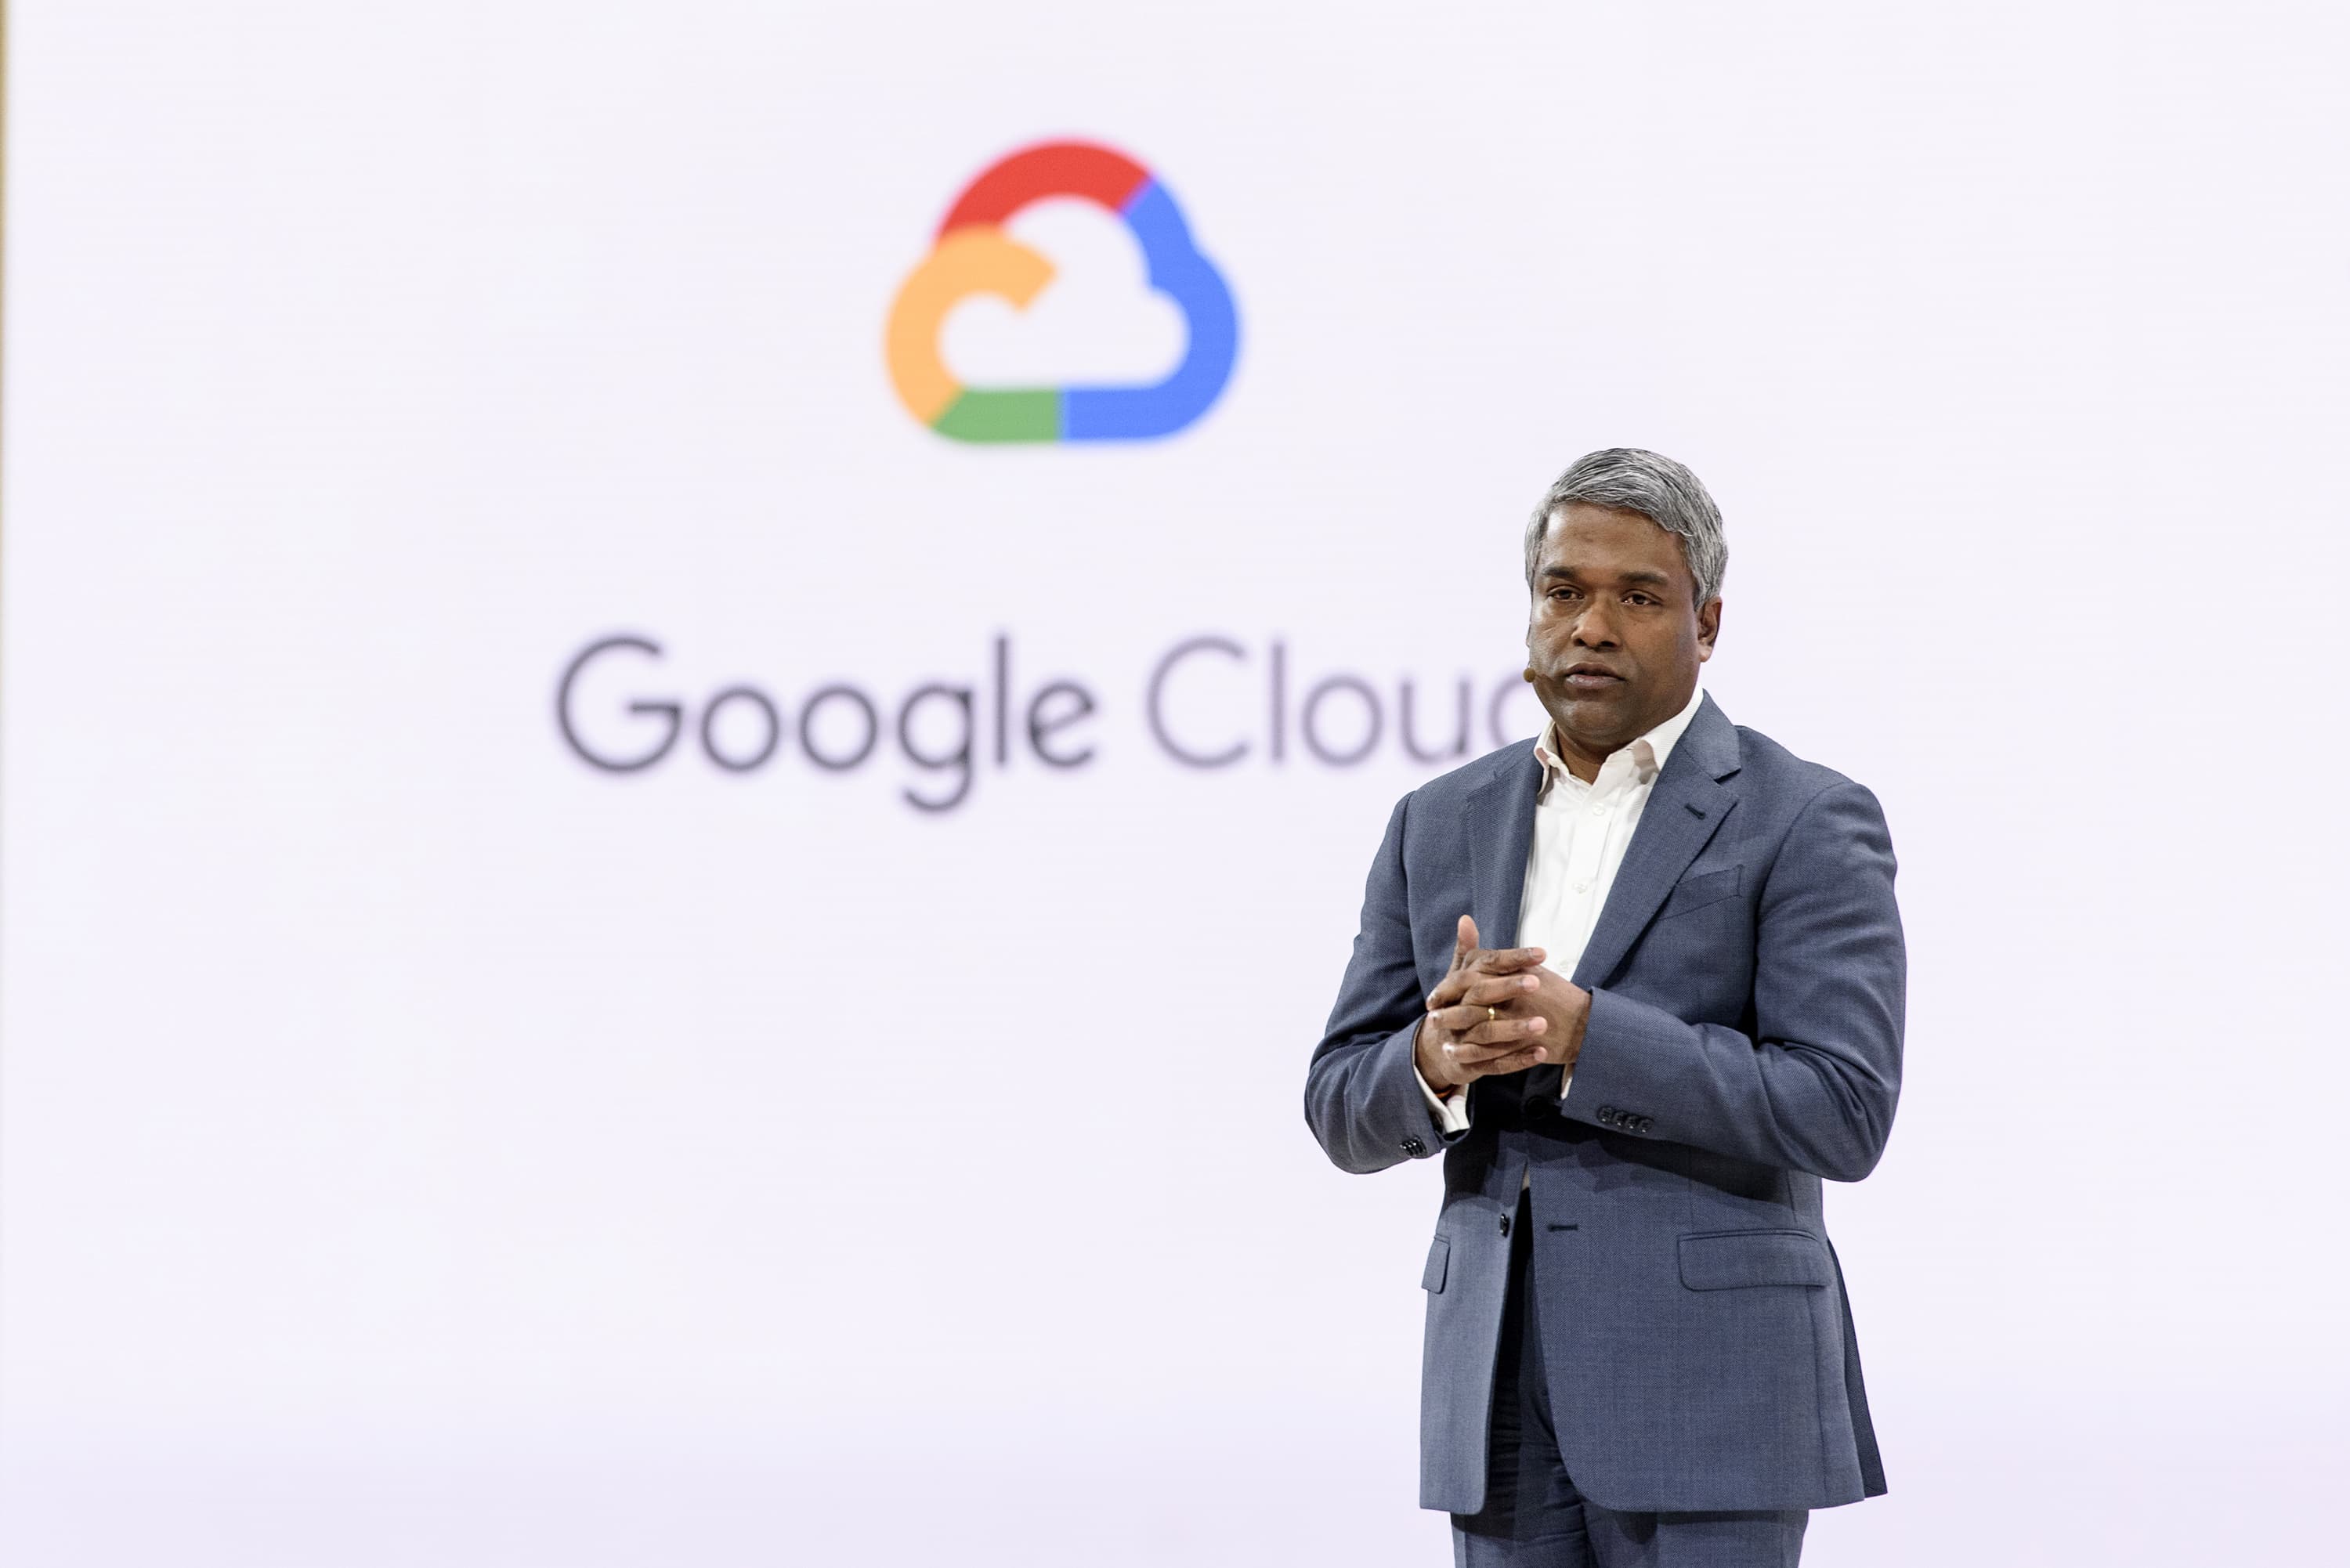 Google Cloud CEO Thomas Kurian reorganizes engineering unit in hopes of gaining market share more quickly